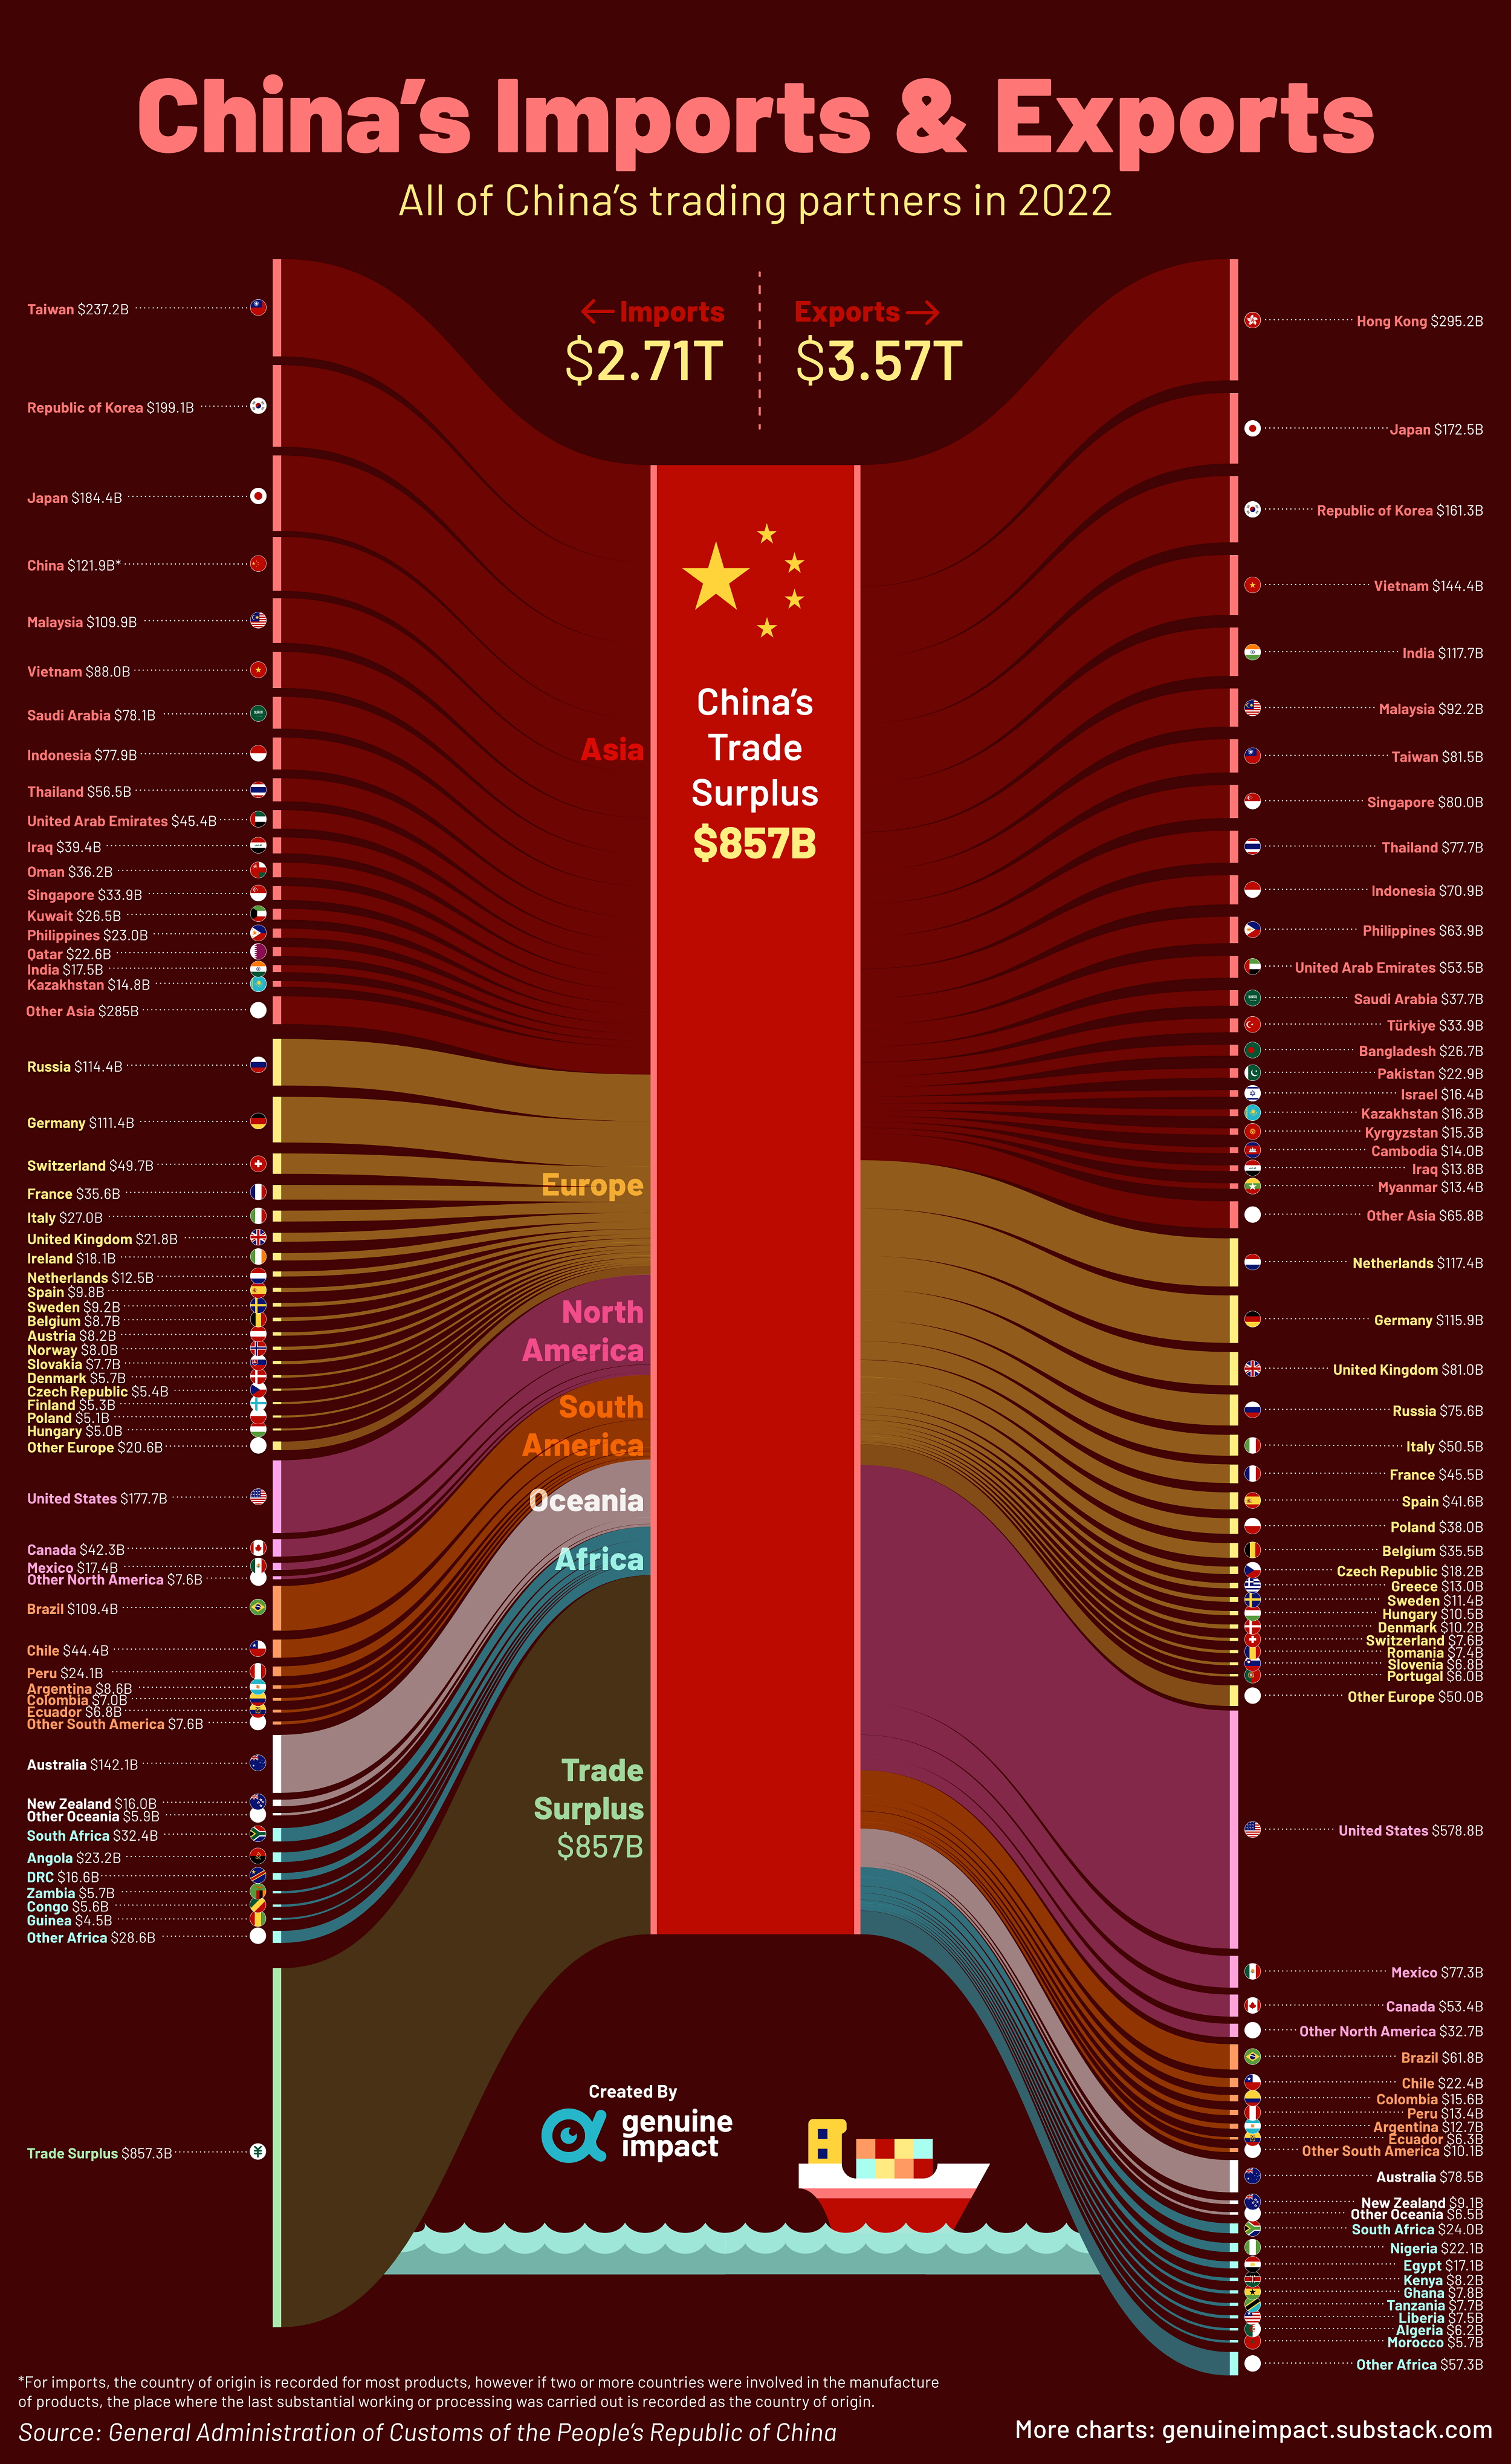 China's trade partners by import and export destinations.